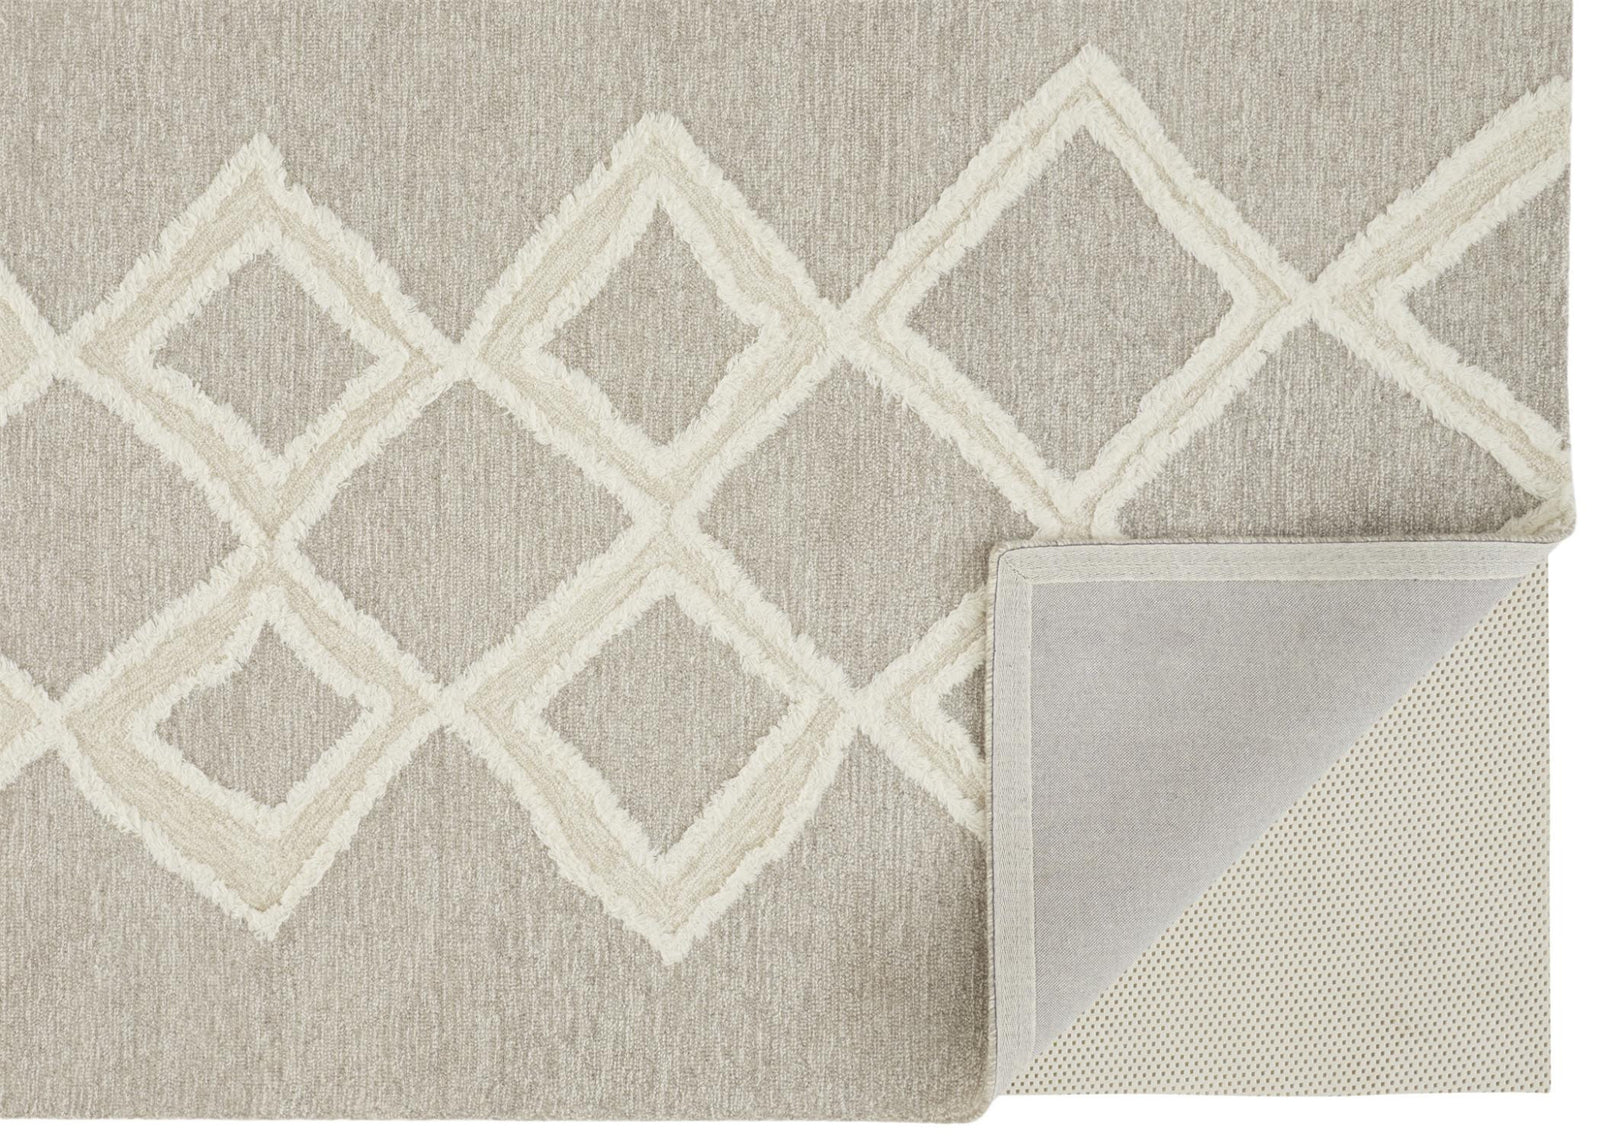 Gray And Ivory Wool Geometric Tufted Handmade Stain Resistant Area Rug - 4' X 6'